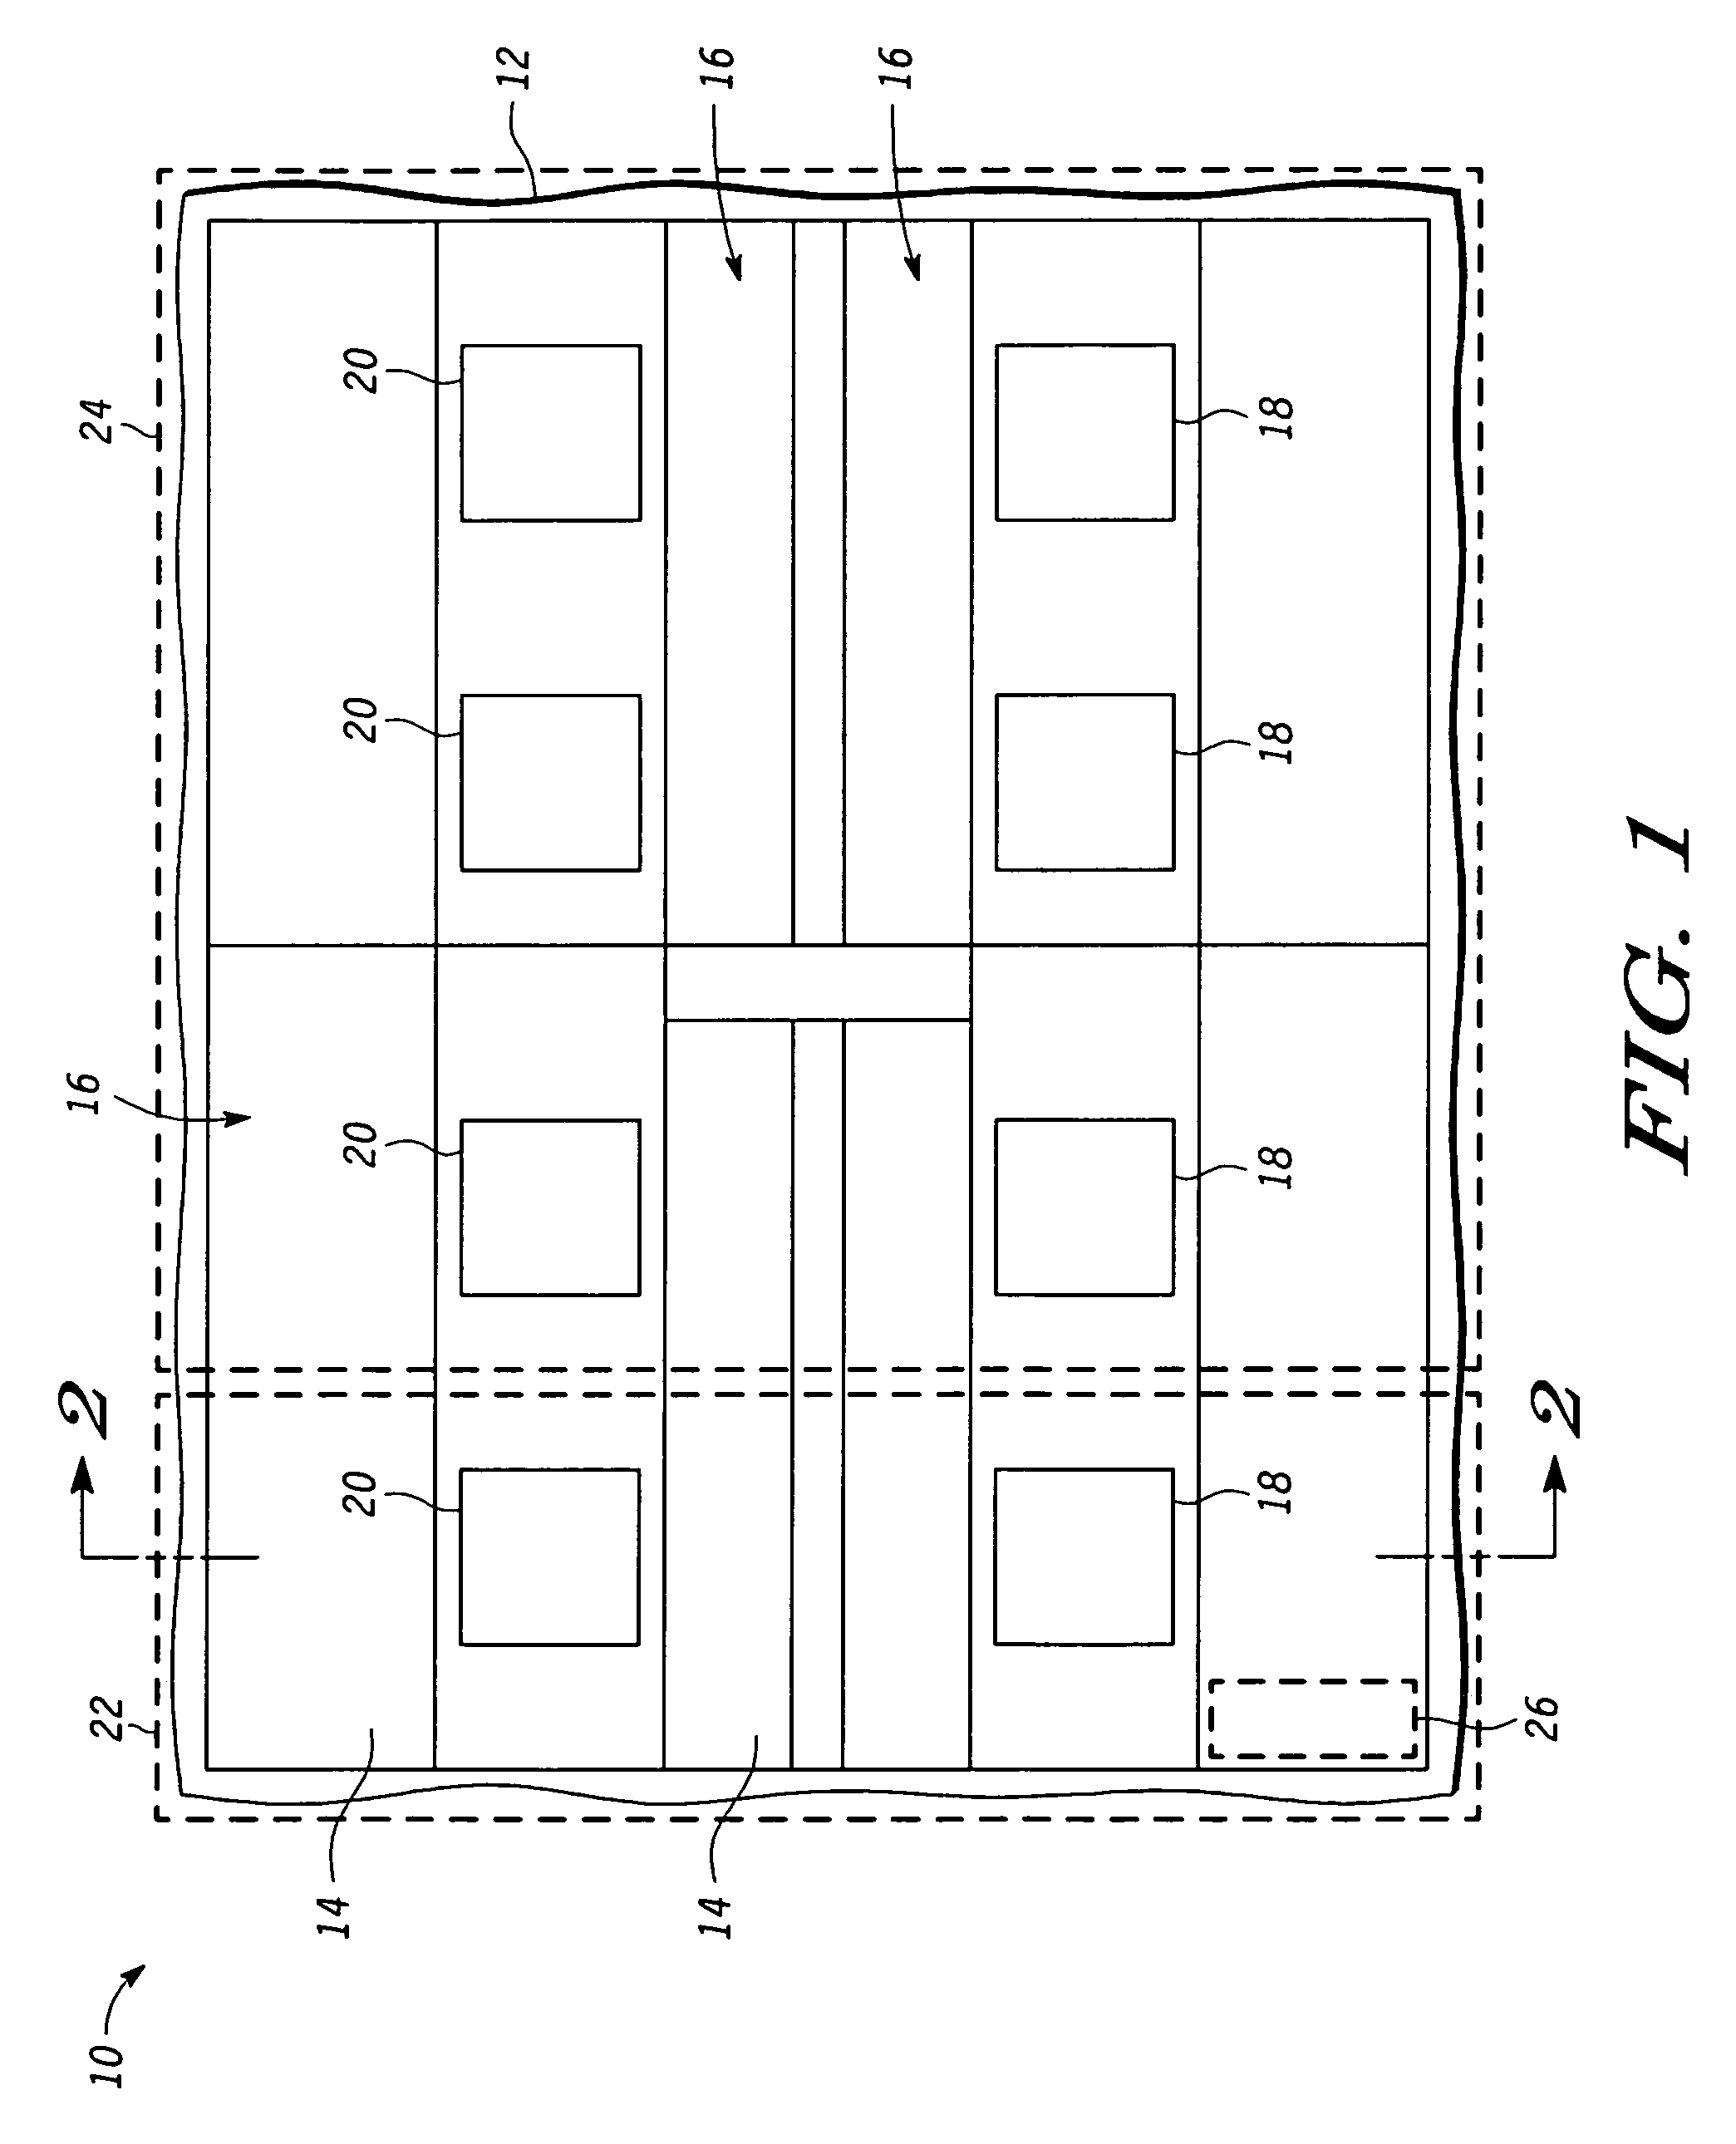 System and method for reducing current in a device during testing